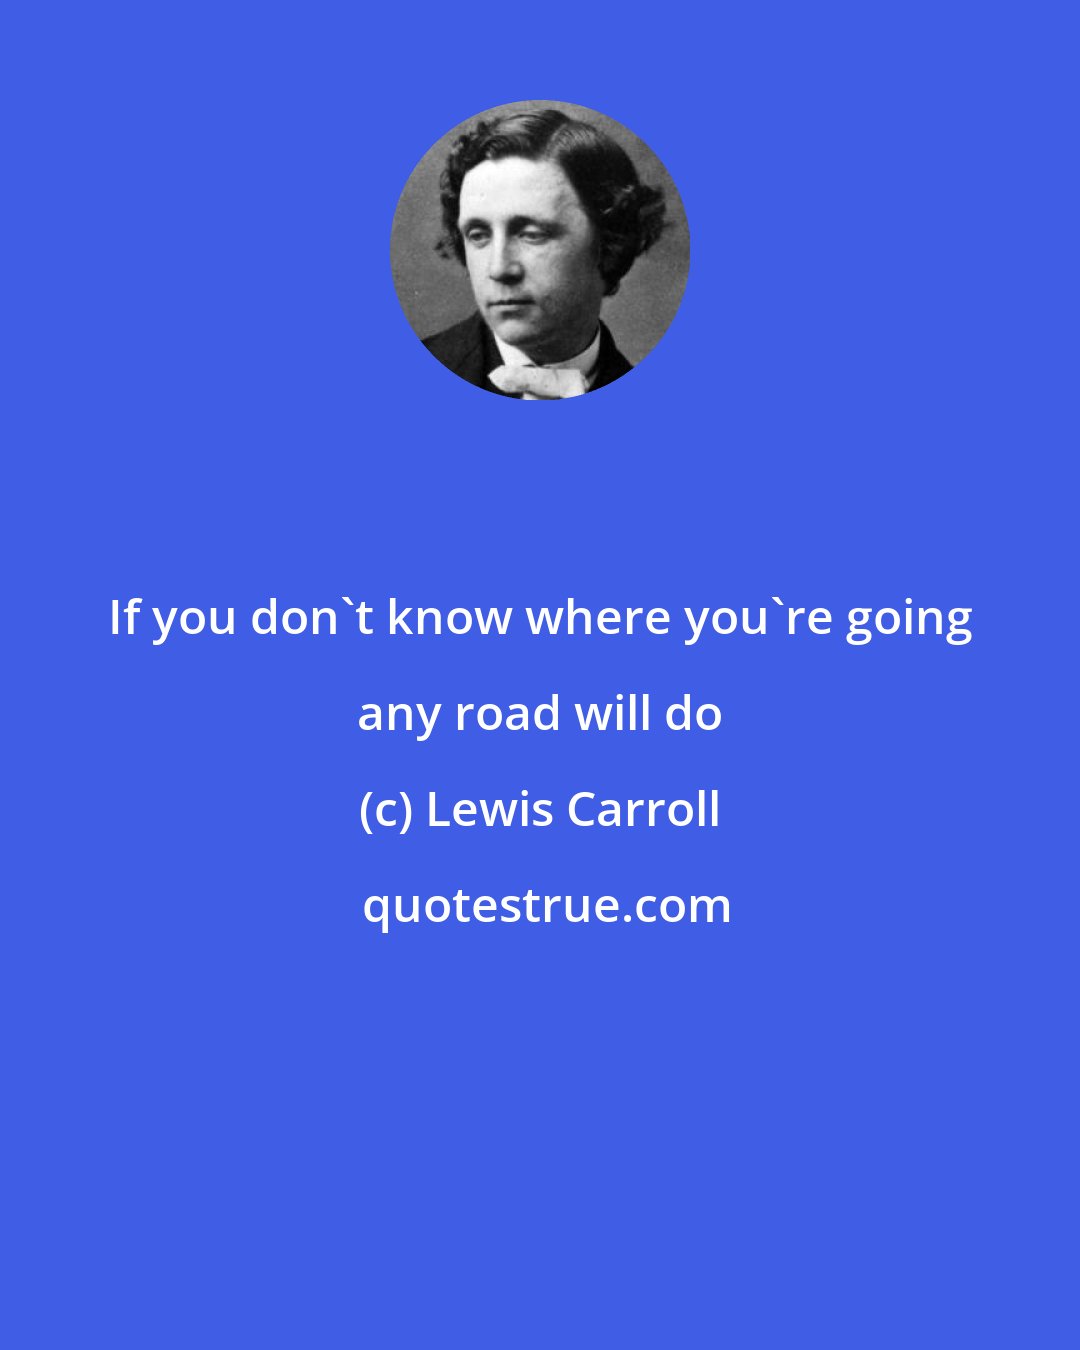 Lewis Carroll: If you don't know where you're going any road will do